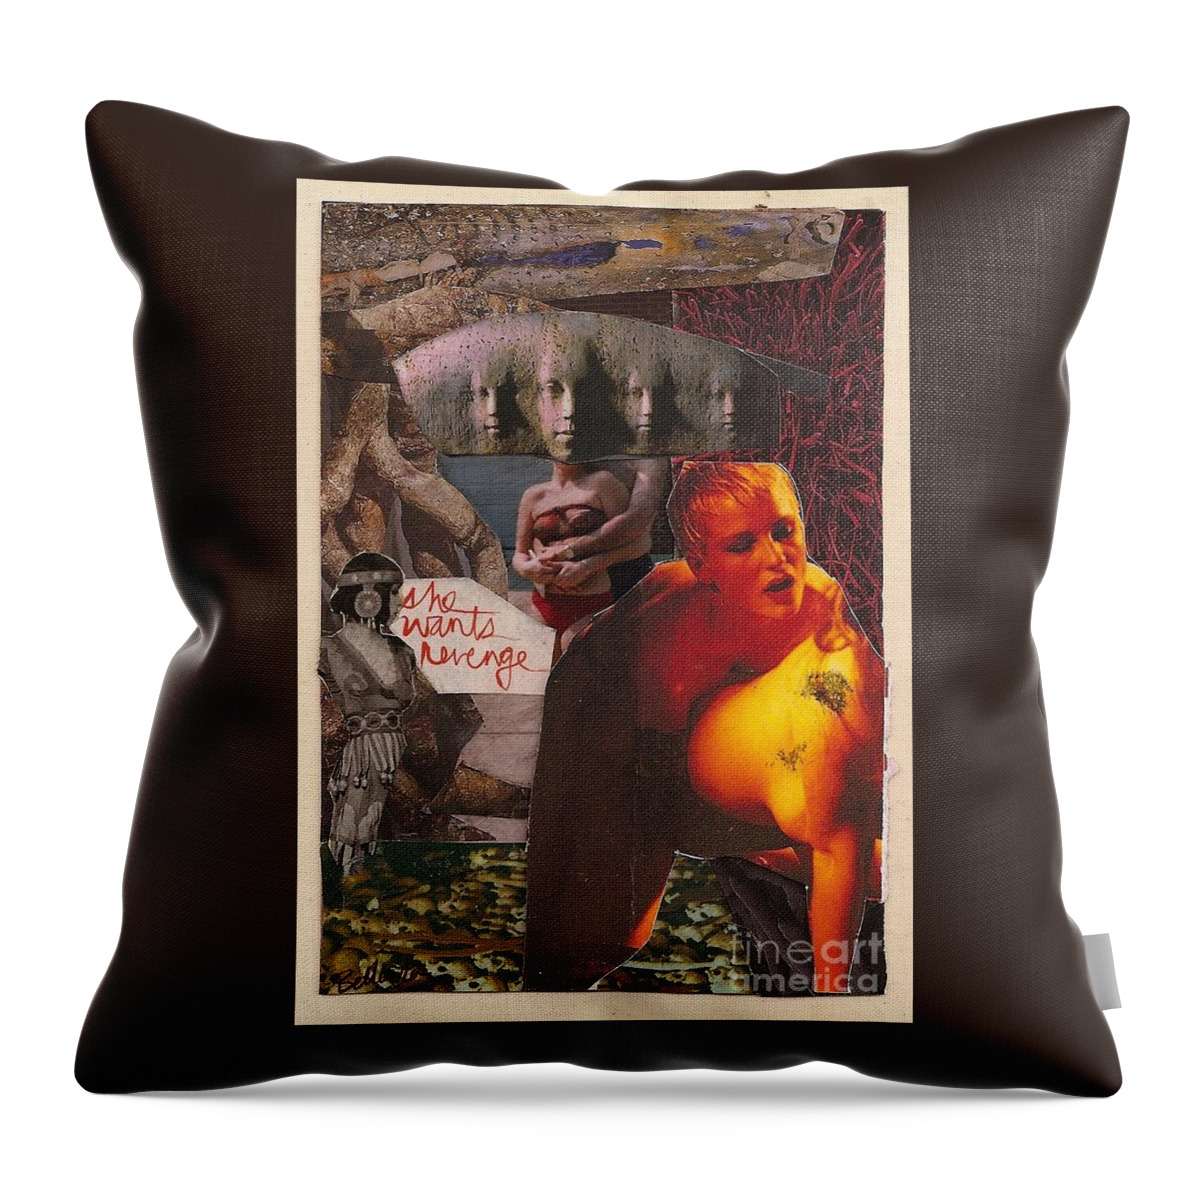 Mixed Media Throw Pillow featuring the mixed media Revenge by M Bellavia